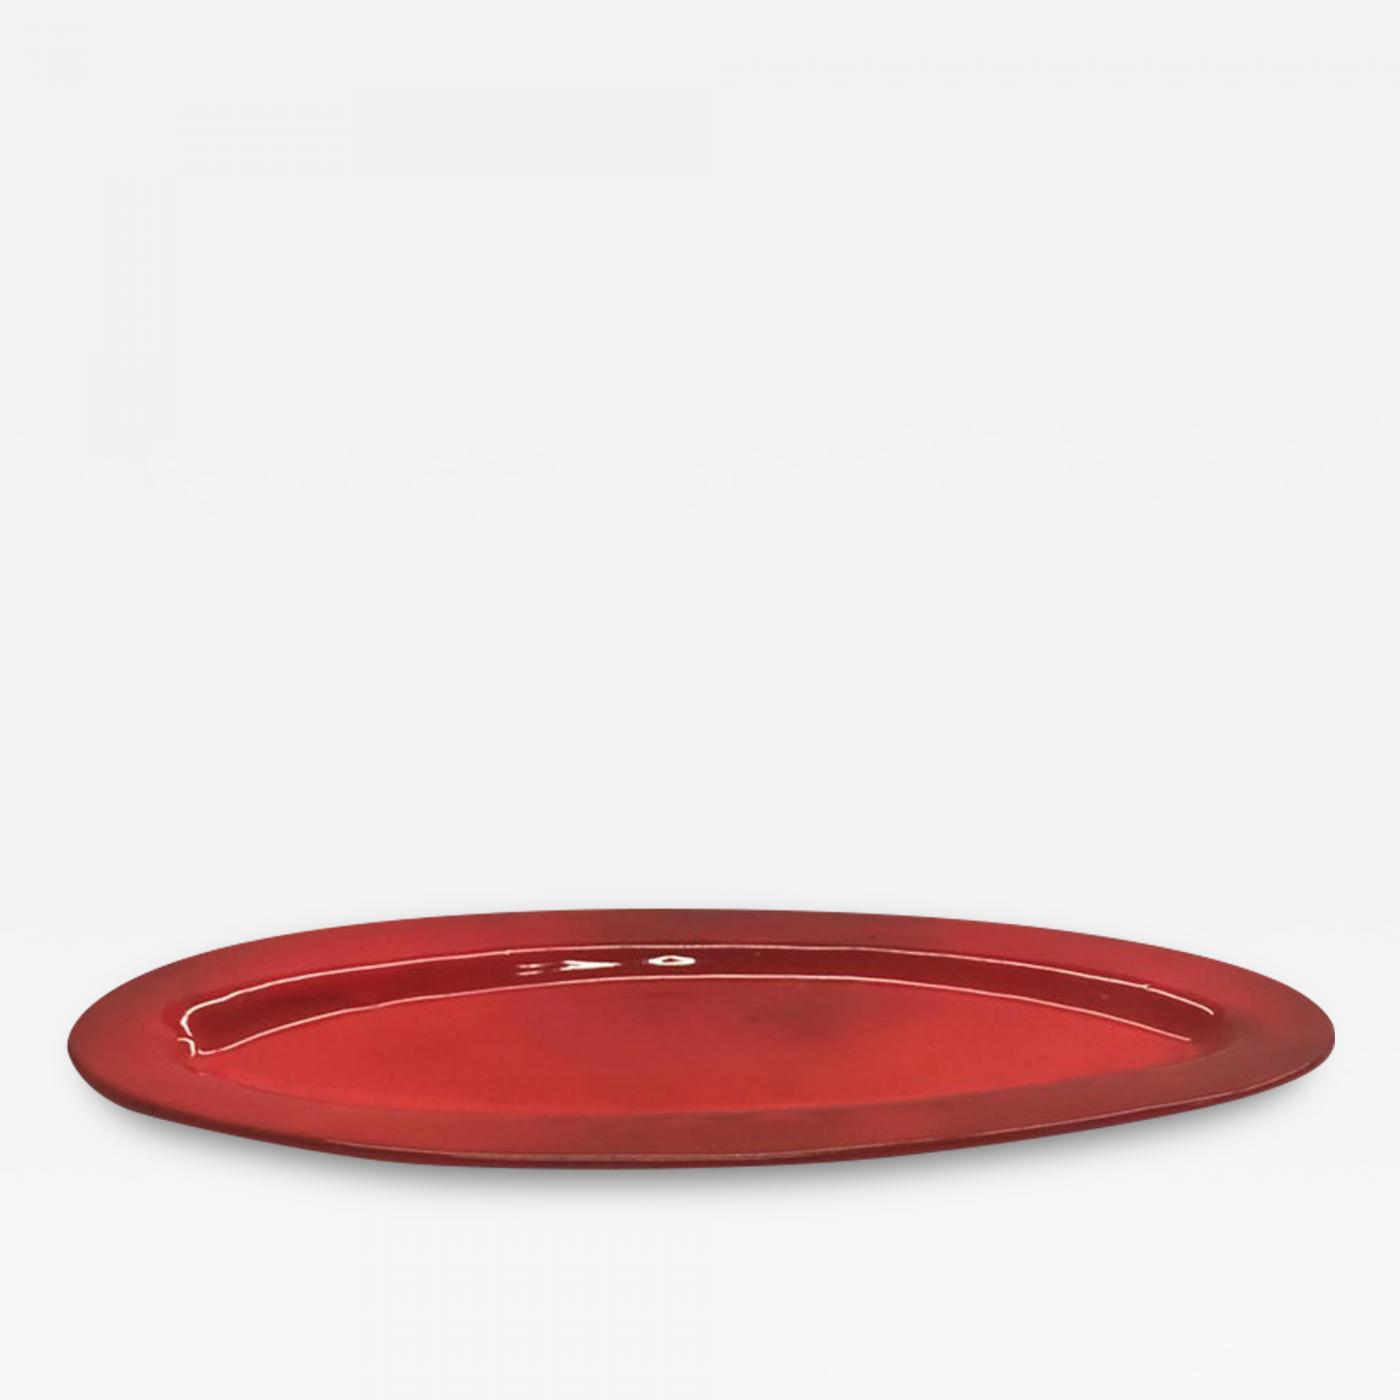 Large French Midcentury Oval Red Ceramic Serving Platter by Voltz